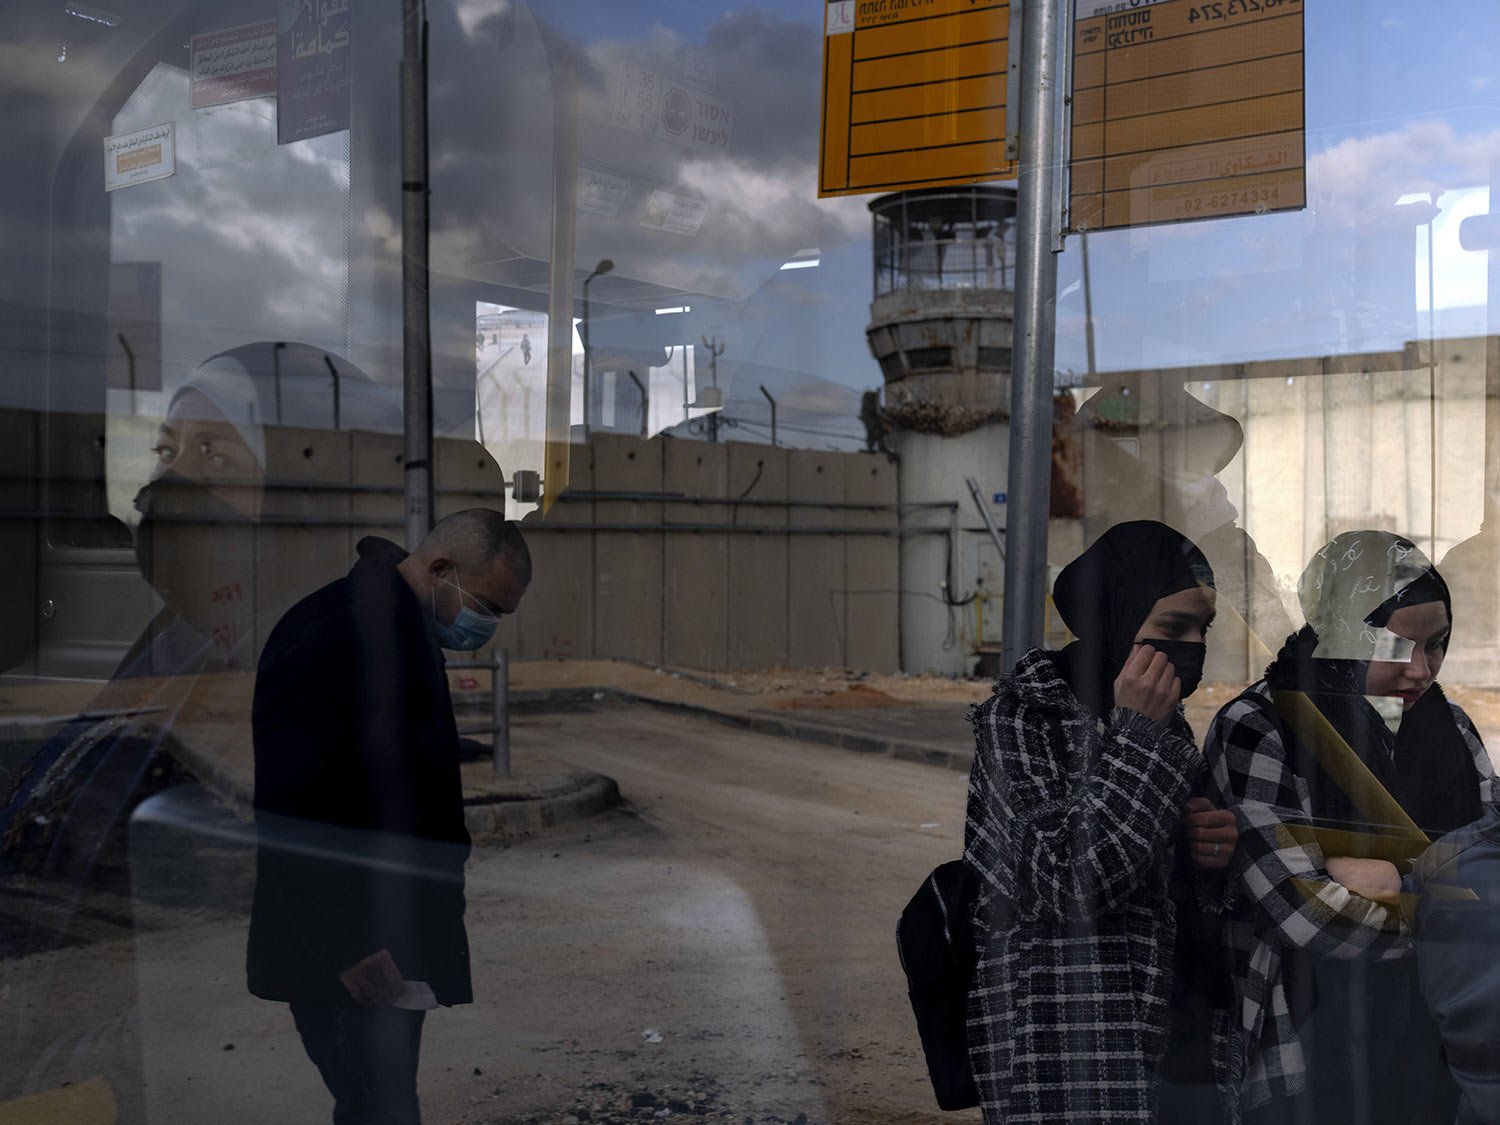  Palestinian commuters get on a bus next to a section of Israel's separation barrier after crossing into Israel through Qalandia checkpoint between the West Bank city of Ramallah and Jerusalem, Jan. 31, 2022. (AP Photo/Oded Balilty) 